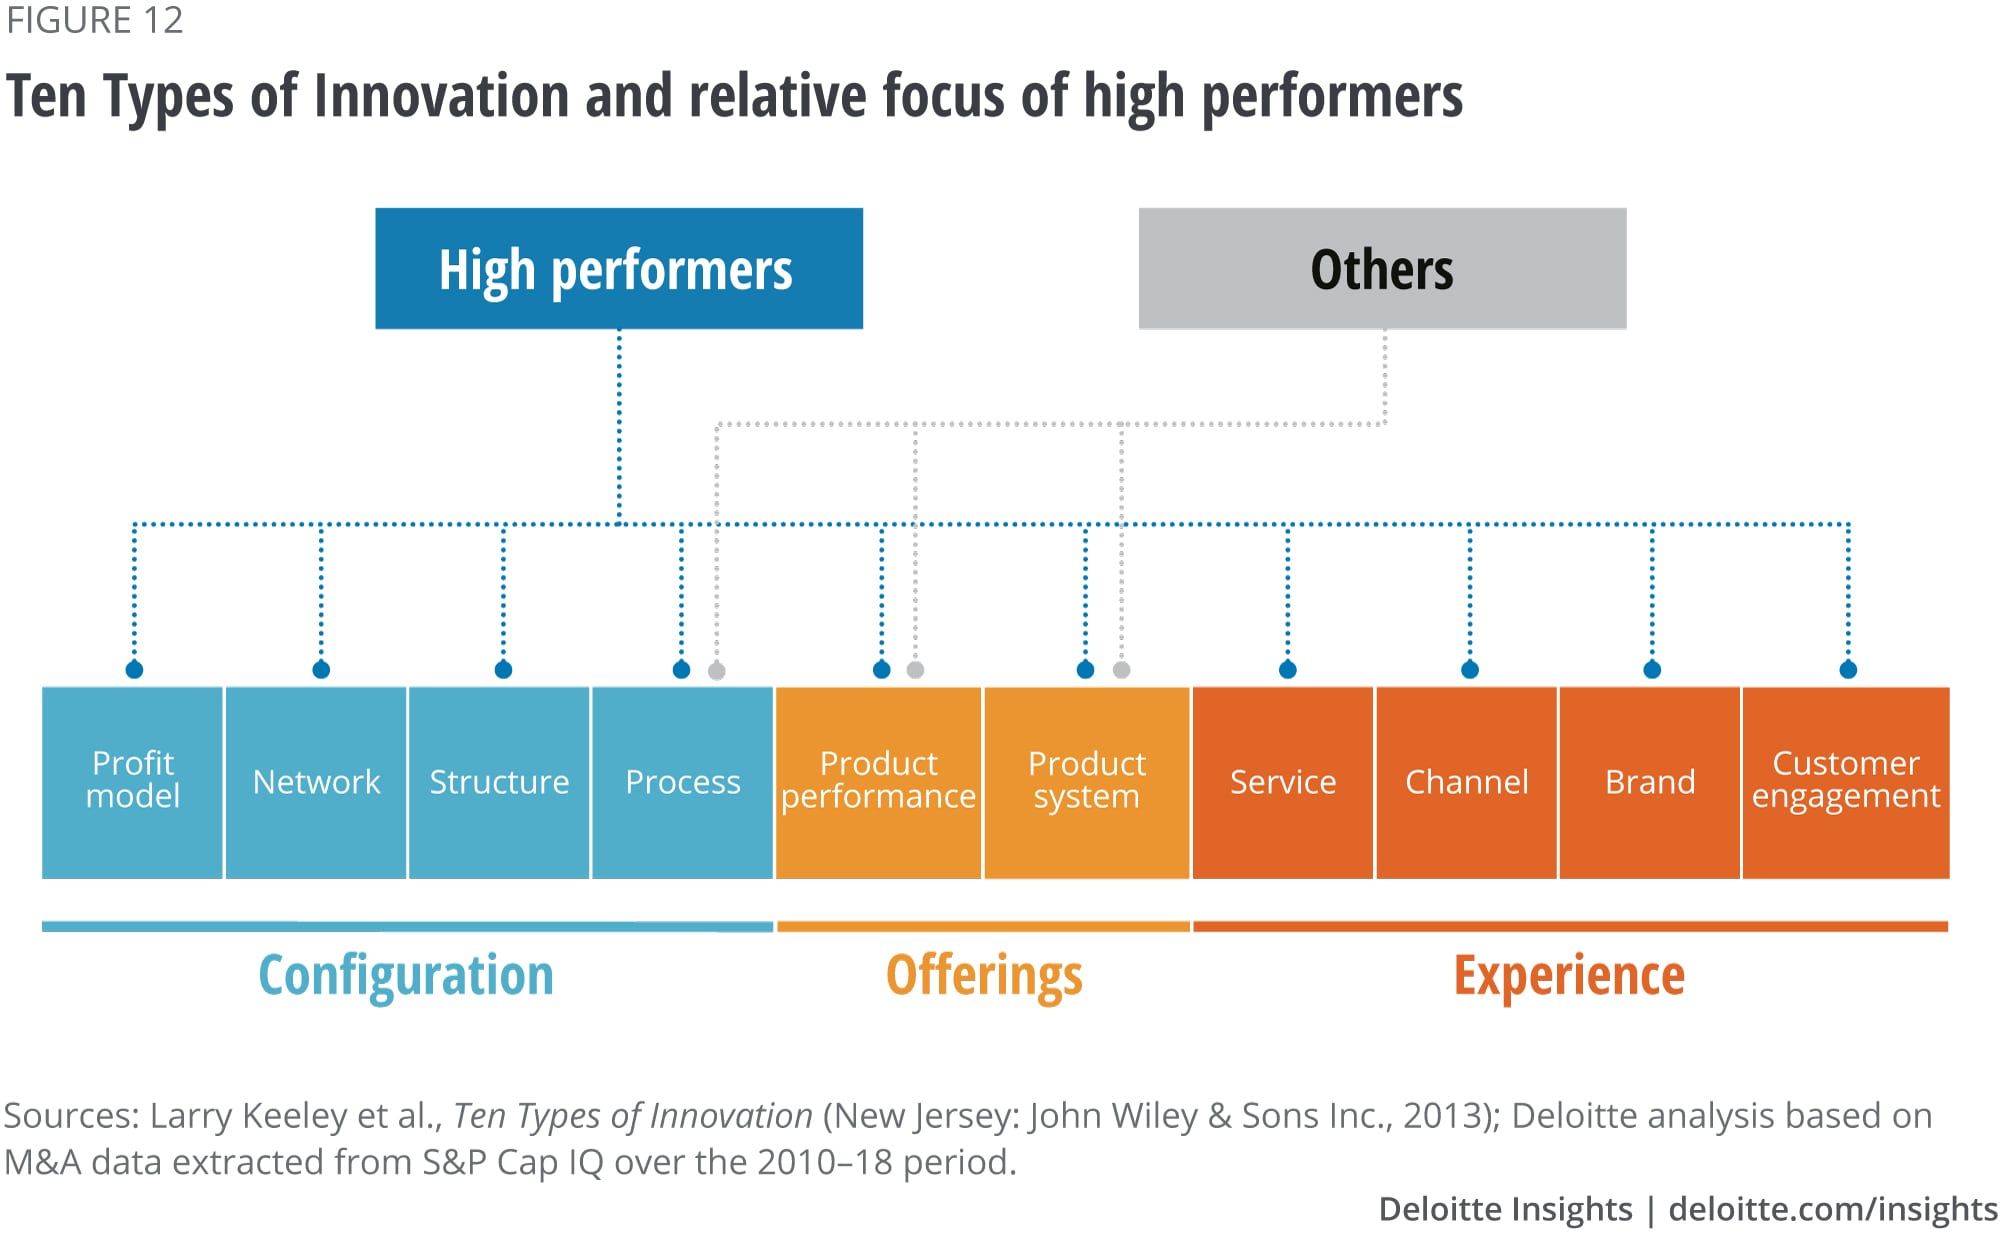 Ten Types of Innovation and relative focus of high performers